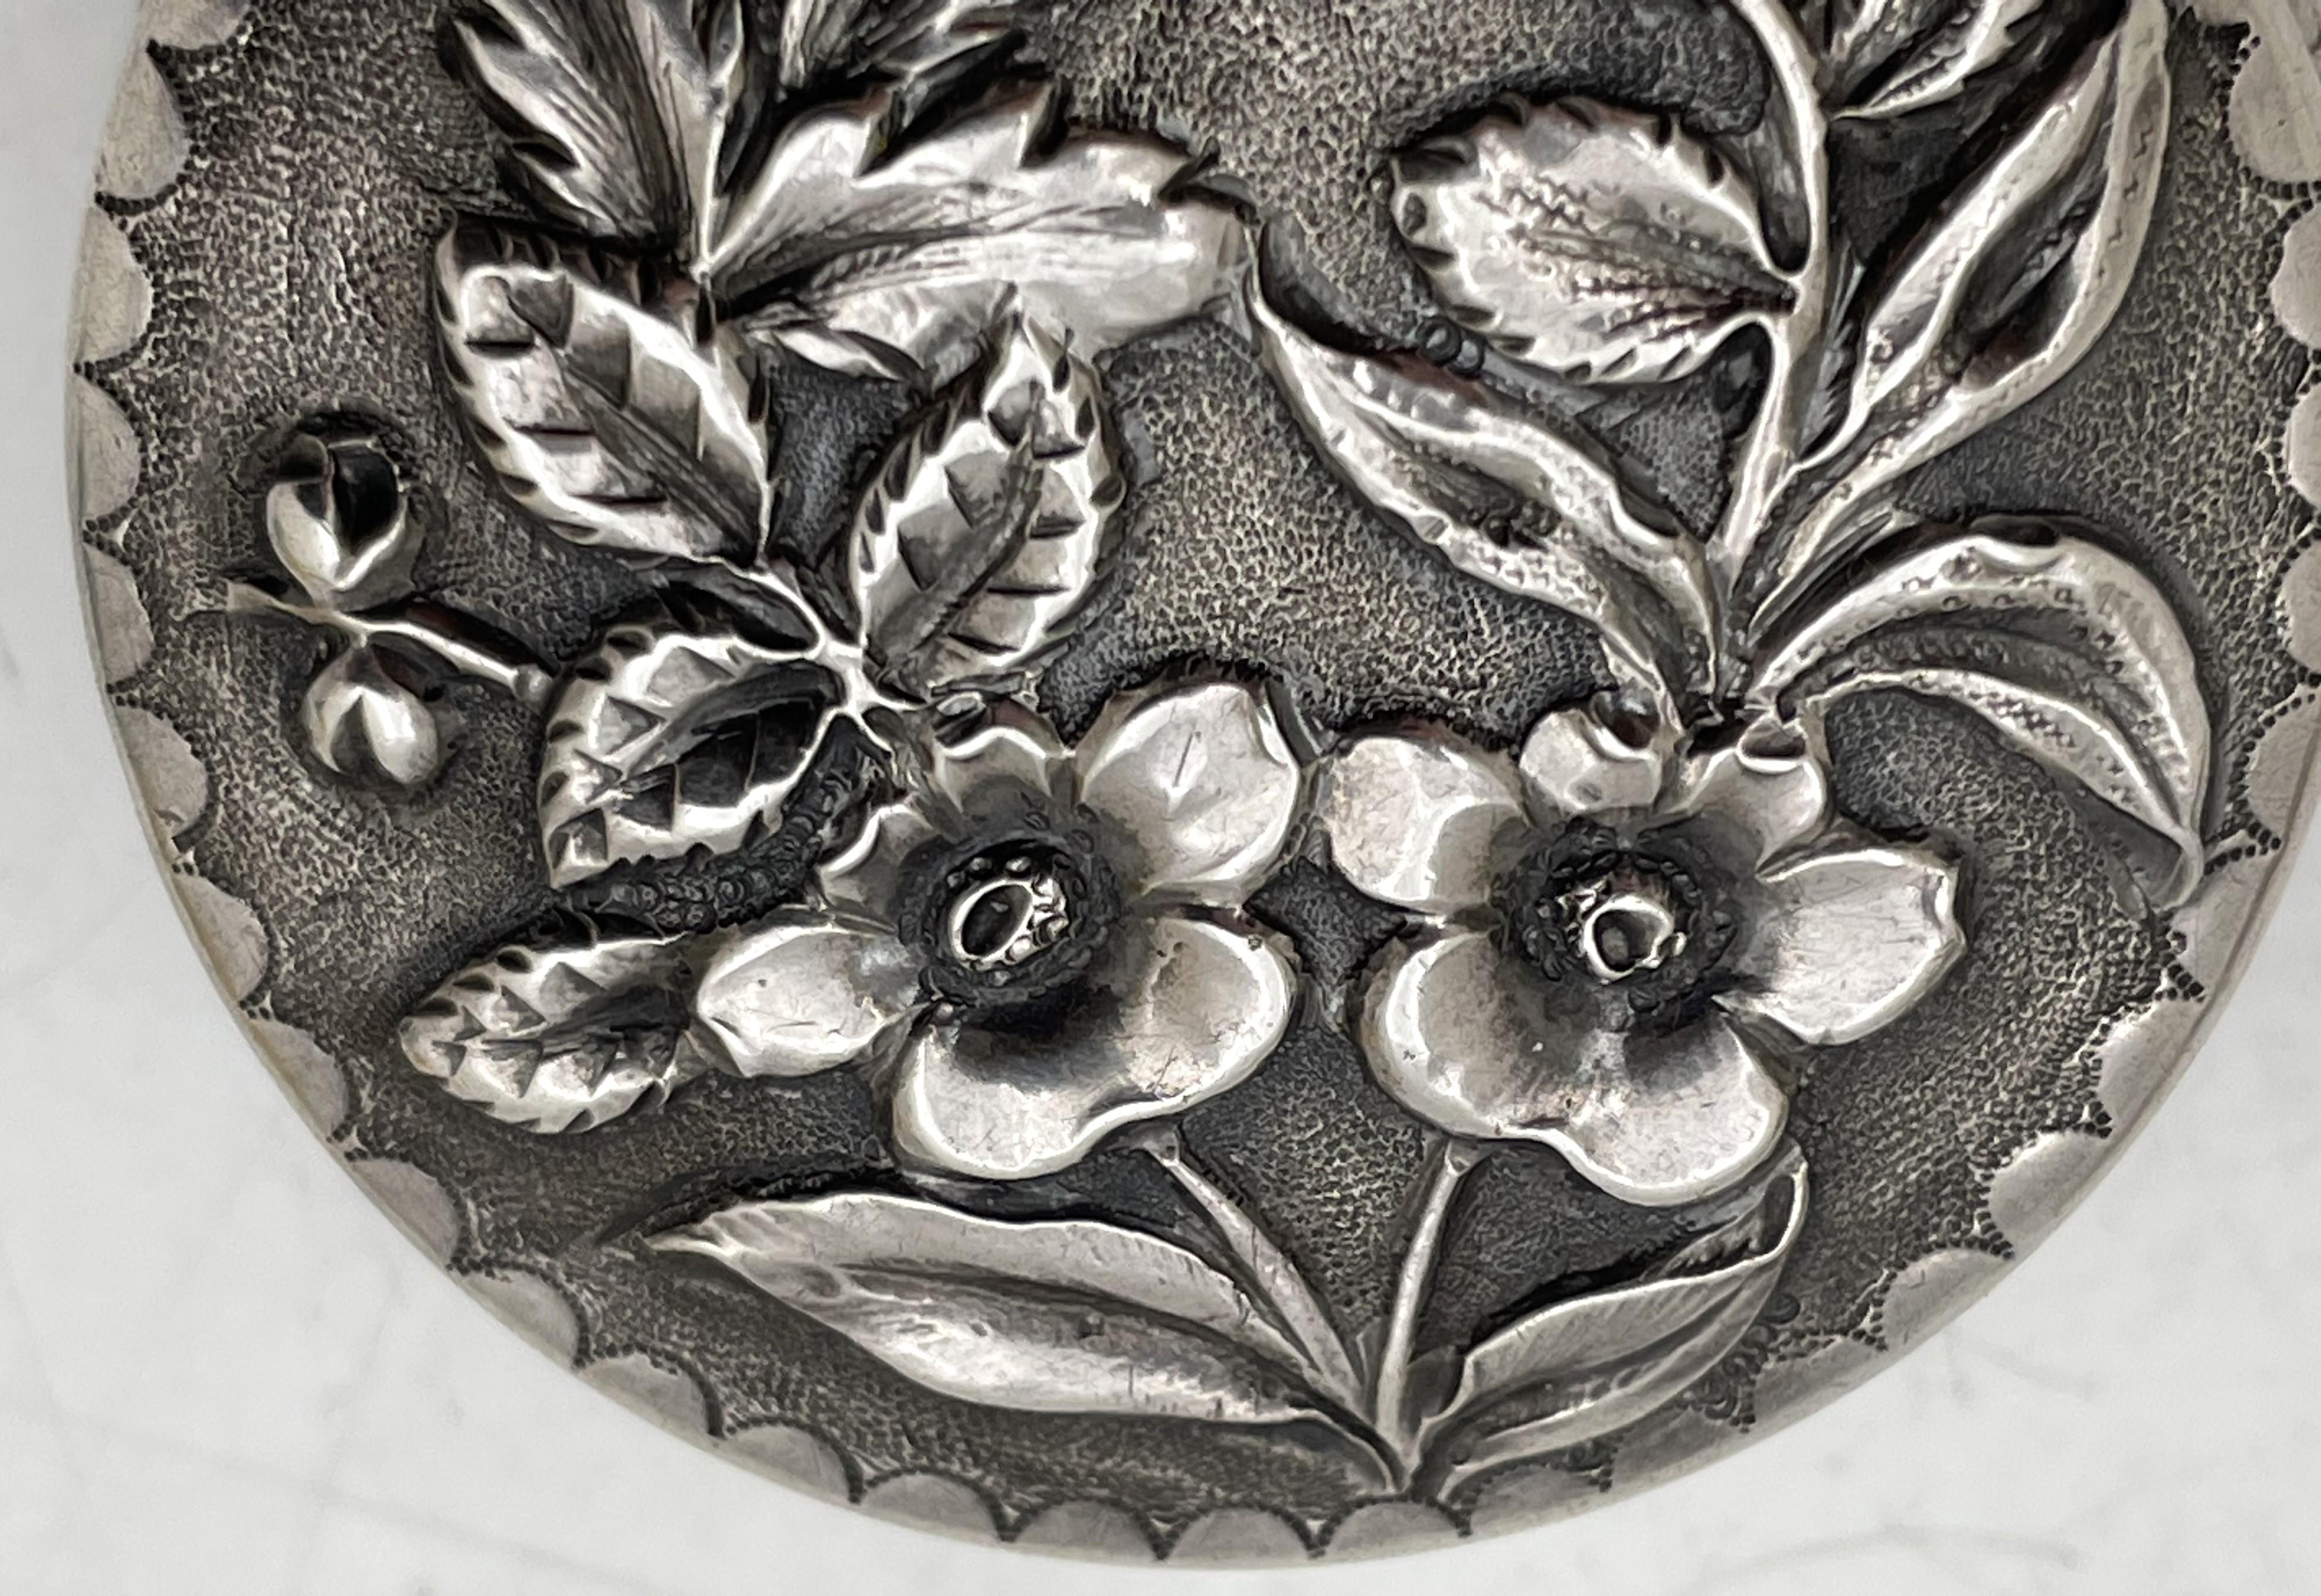 Bailey, Banks & Biddle sterling silver pill box in repousse pattern, beautifully adorned with floral motifs, gilt inside. from the late 19th century. It measures 1 7/8'' by 1/3'' in height, and bears hallmarks as shown. 

Bailey & Kitchen, as it was